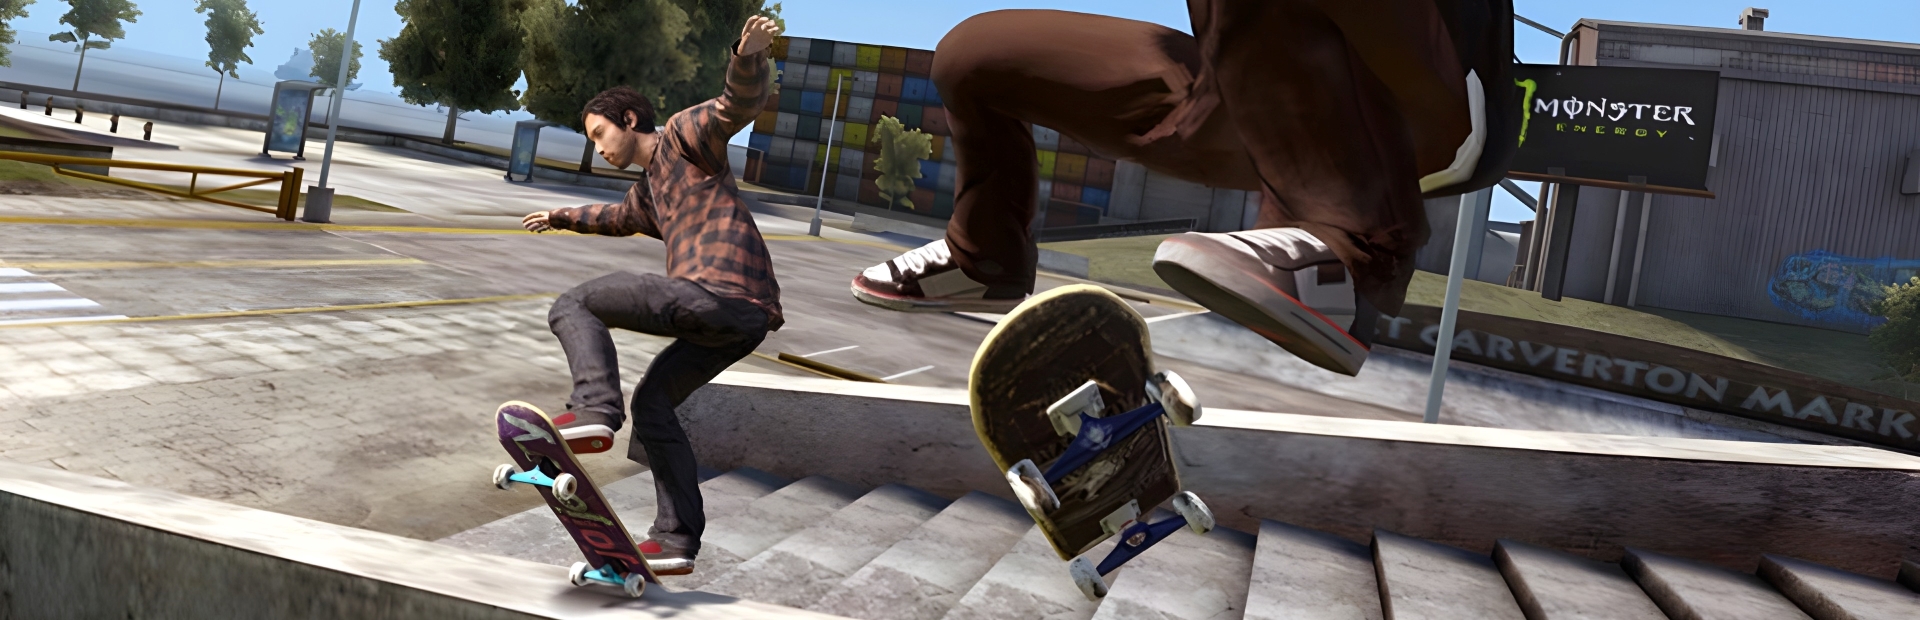 Is there a game similar to Skate 3 on Steam? : r/skate3